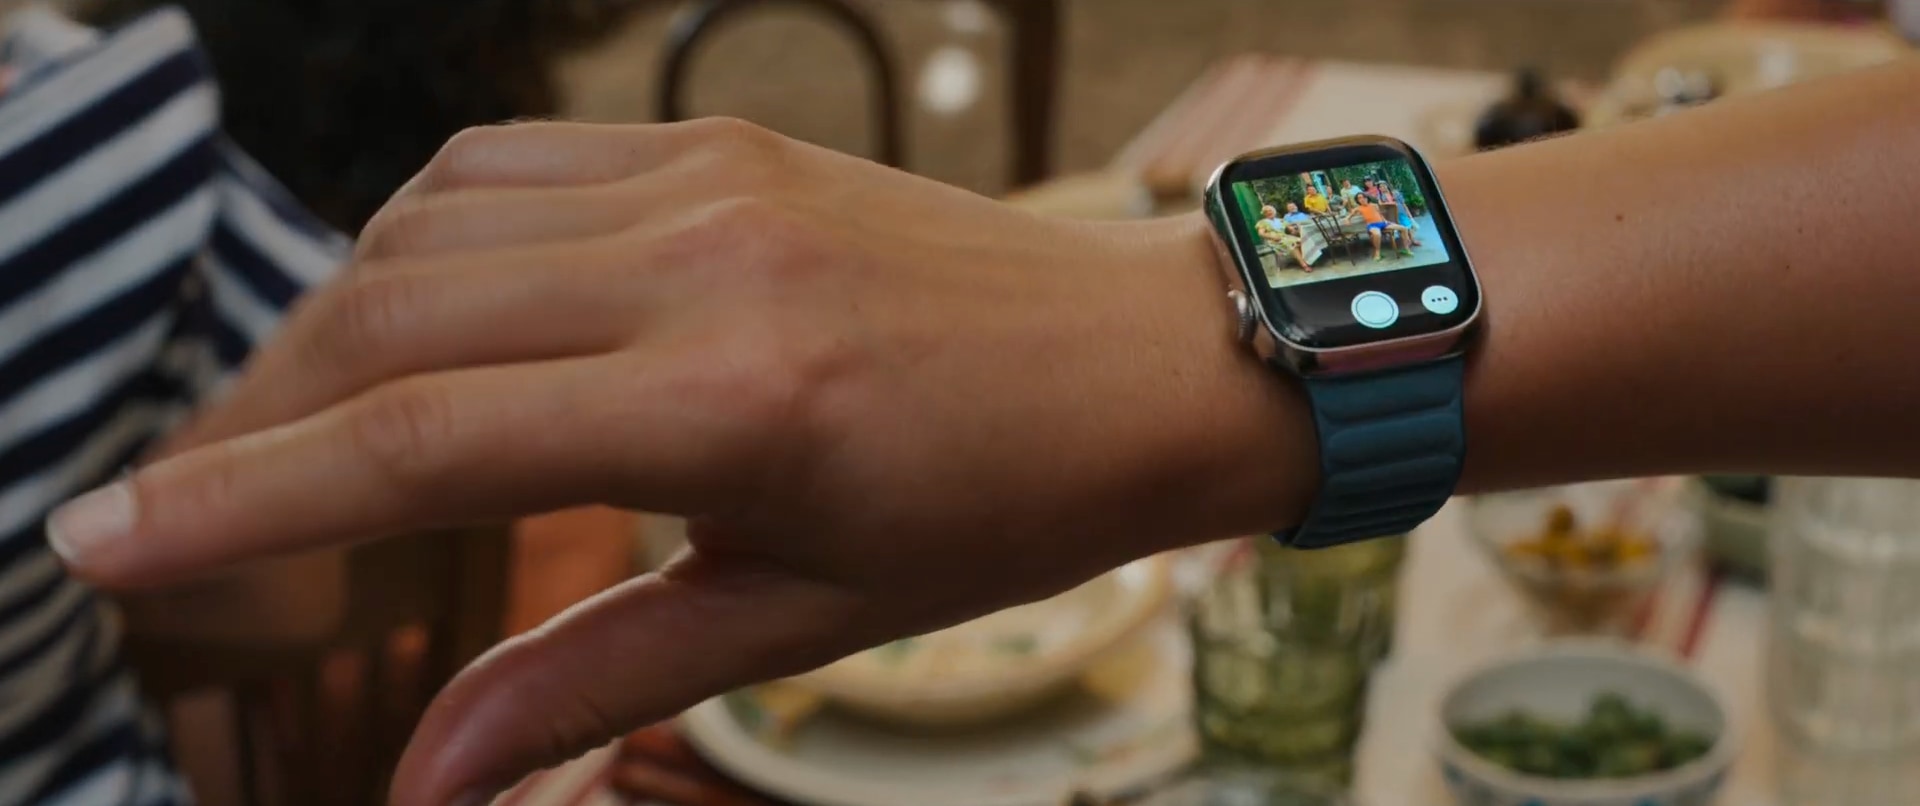 Using the double-tap gesture to take a photo with the Apple Watch's Remote Camera app